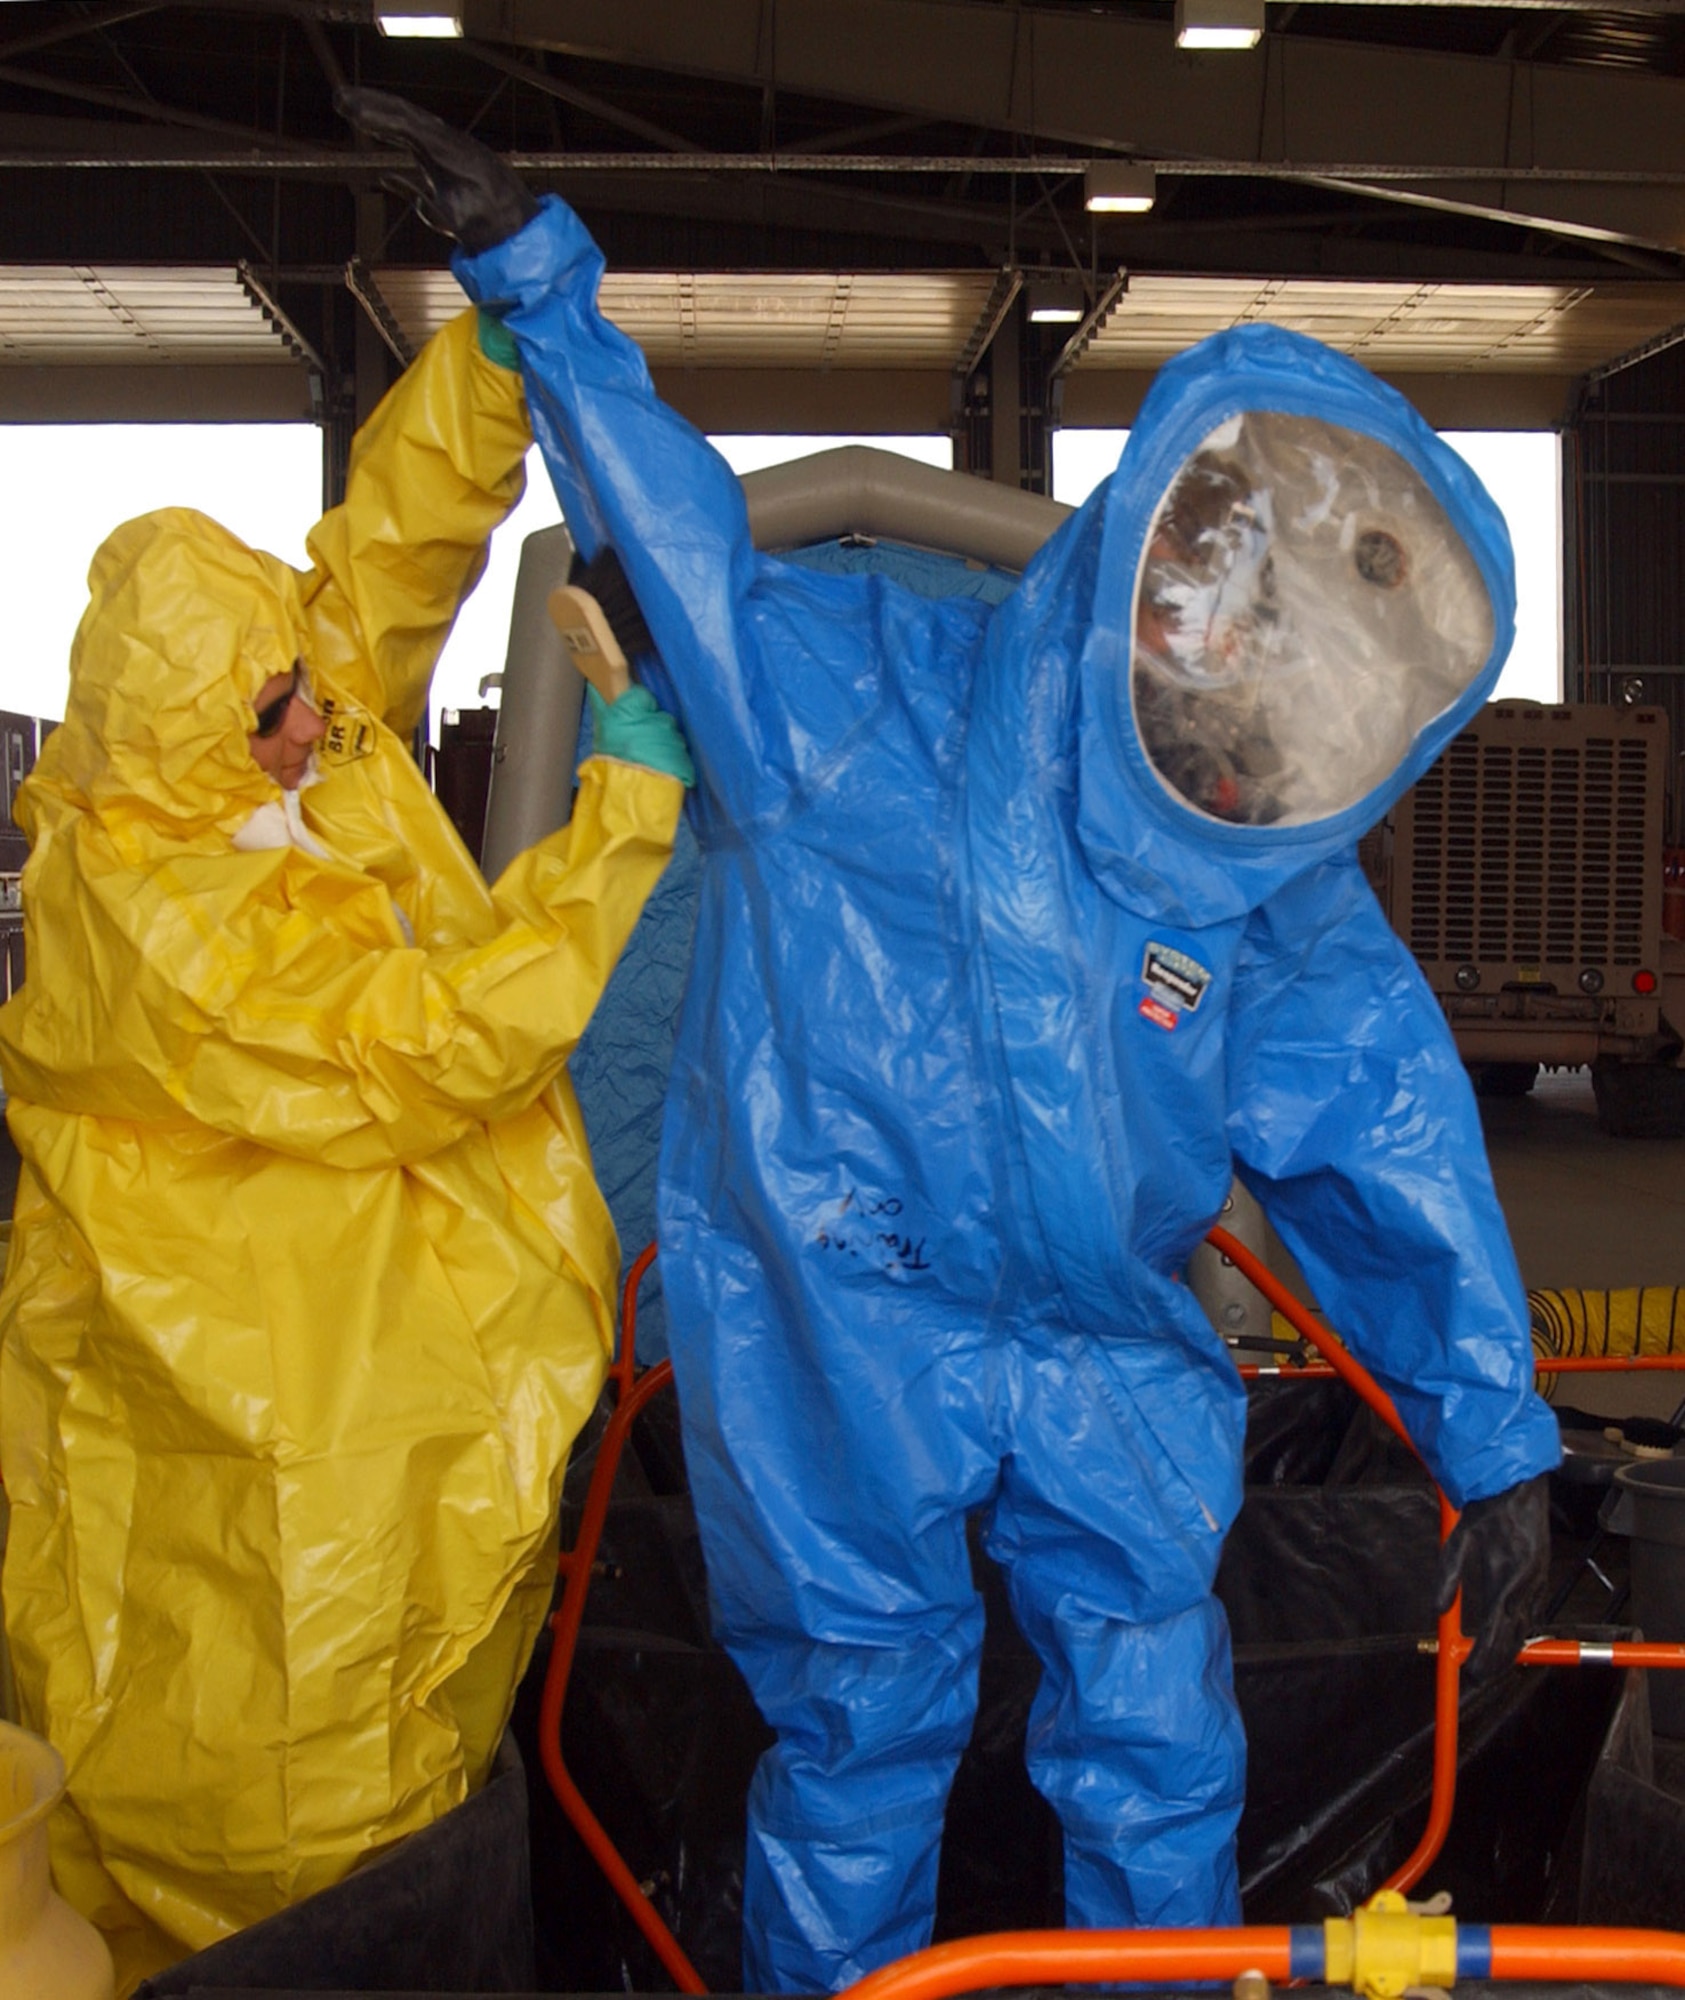 While wearing a yellow Level B suit, Army Spc. Michael Harms simulates scrubbing chemicals off of Airman 1st Class Glenn Rodgers, in a blue Level A suit, during a training exercise June 5 at Balad Air Base, Iraq. The firefighters set up a hazardous-material decontamination line and practiced so that they would be able to quickly respond to any real-world threat within 10 minutes. The servicemembers are firefighters with the 332nd Expeditionary Civil Engineer Squadron Fire and Emergency Services Flight. (U.S. Air Force photo/1st Lt. Shannon Collins)